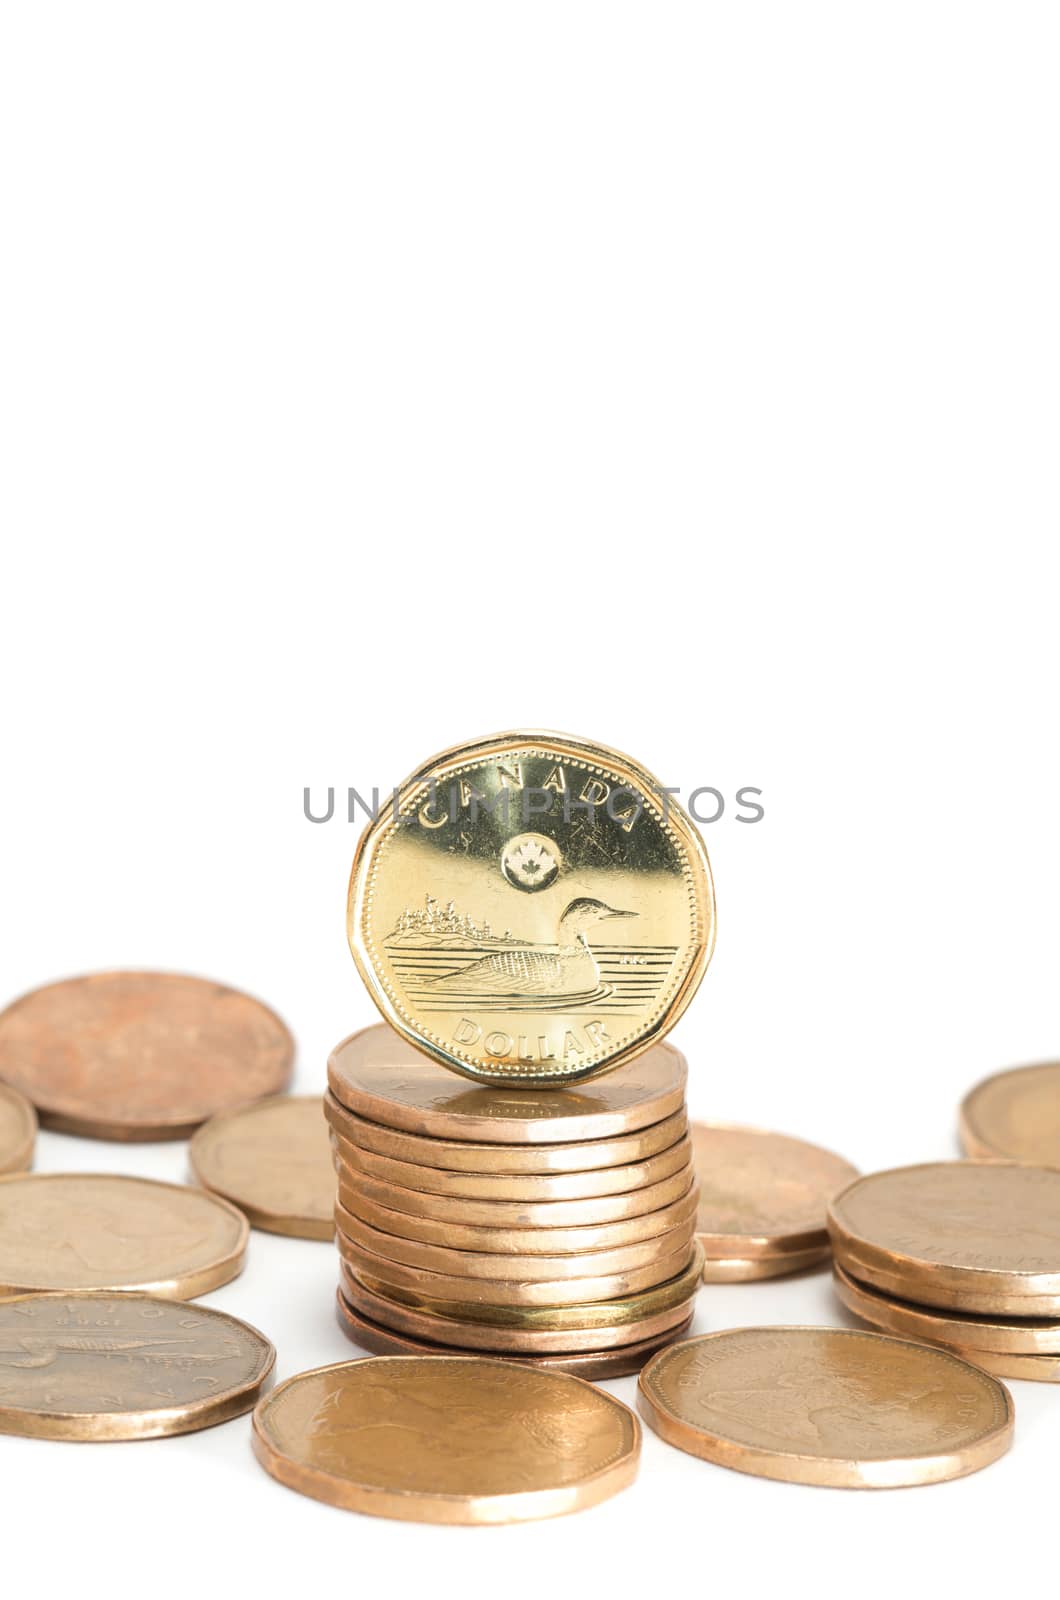 One Canadian dollar coins stack on white background